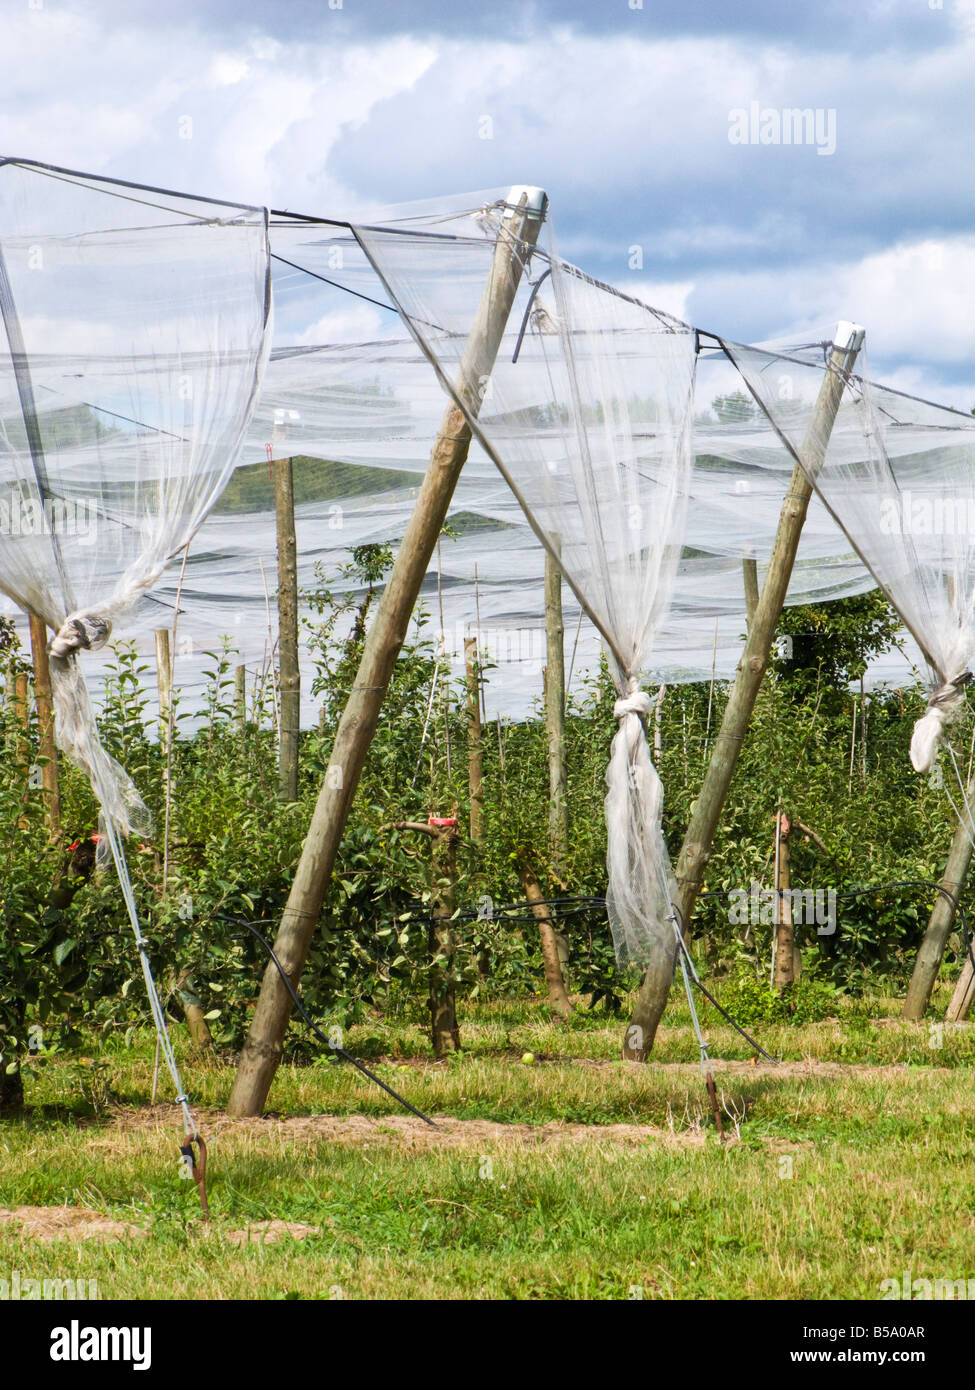 Large cloches protecting young fruit trees, Europe Stock Photo